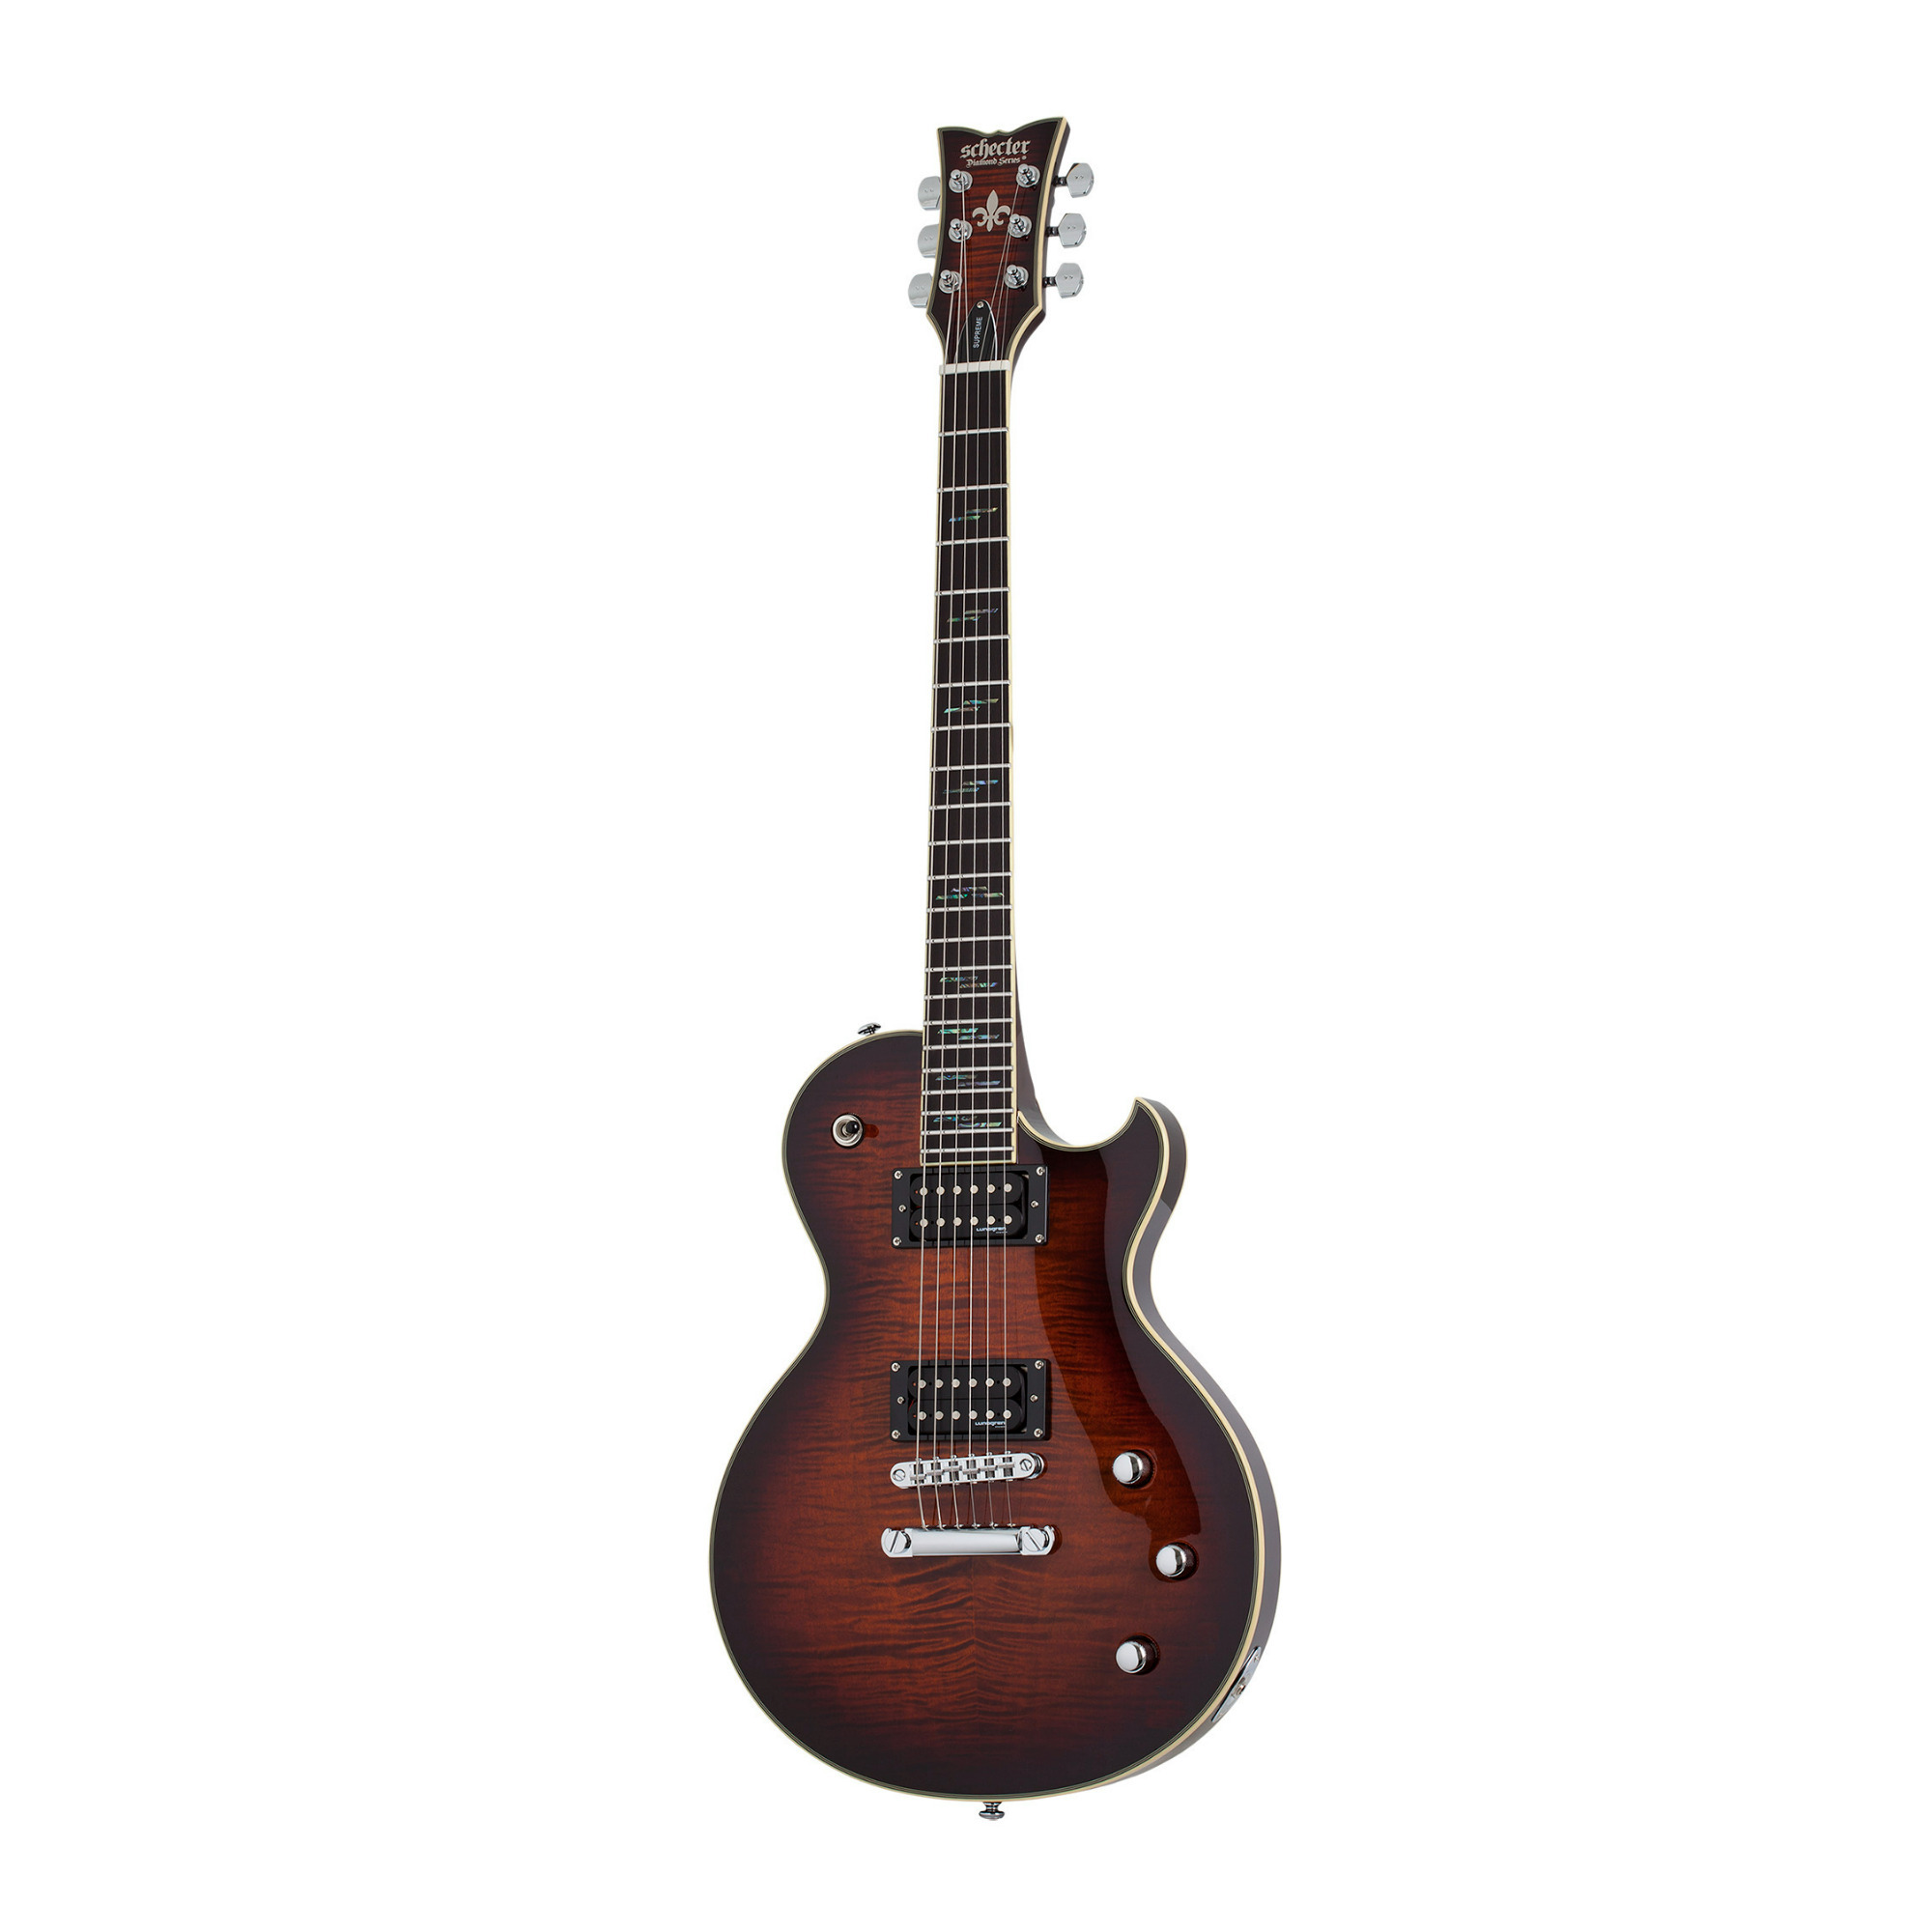 Schecter Guitar Research Schecter Solo-II Supreme 6-String Electric Guitar (Right-Handed, Cat's Eye Black Burst) in Brown -  SGR-2591